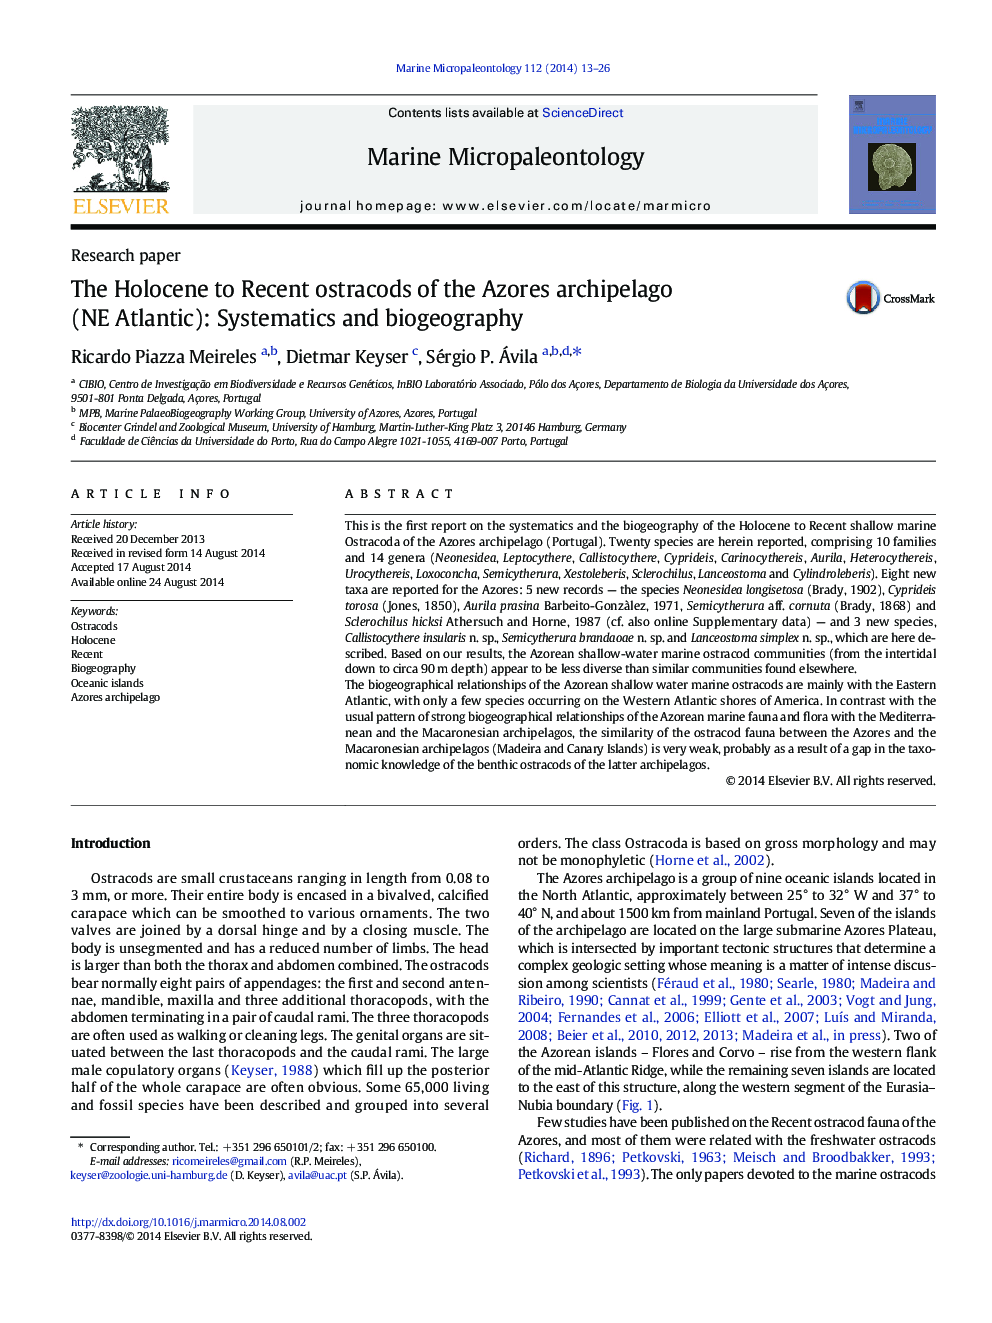 The Holocene to Recent ostracods of the Azores archipelago (NE Atlantic): Systematics and biogeography